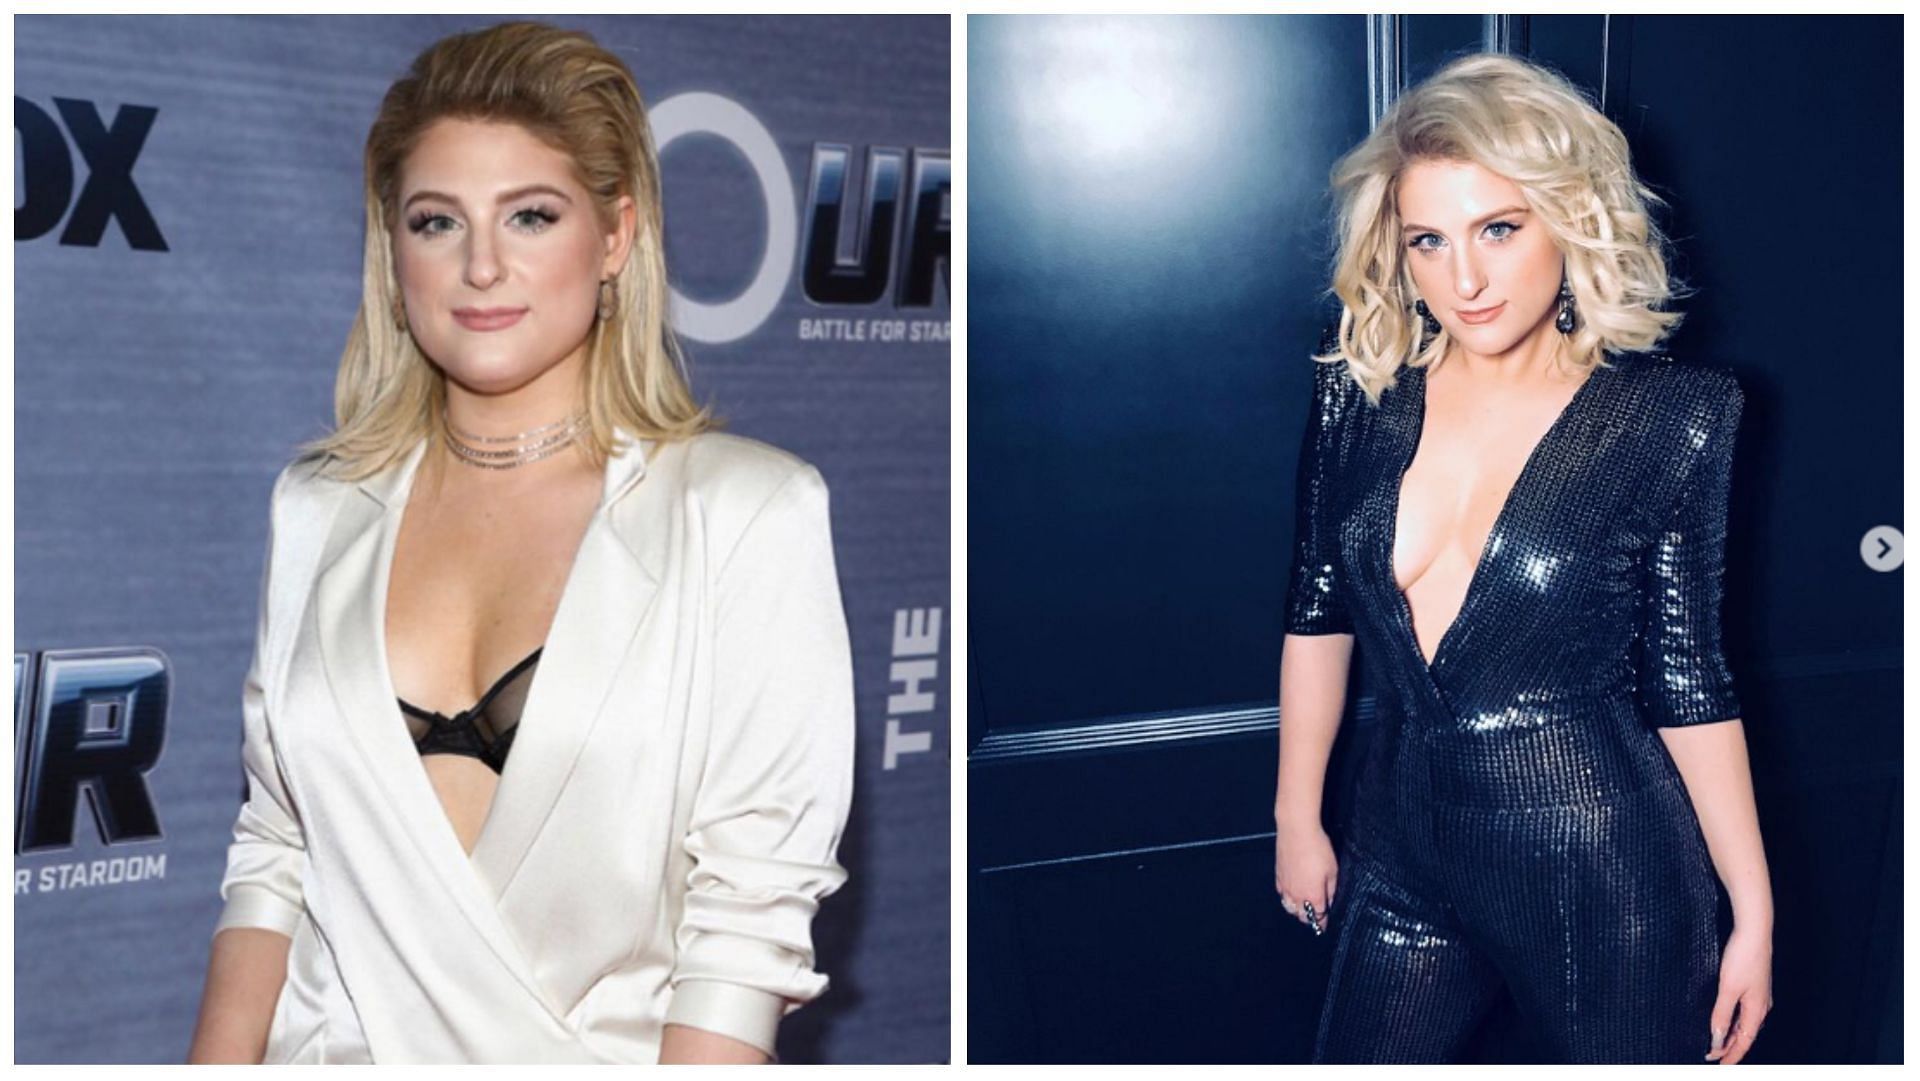 Meghan Trainor Then and Now: What the Songstress Has Been Up To